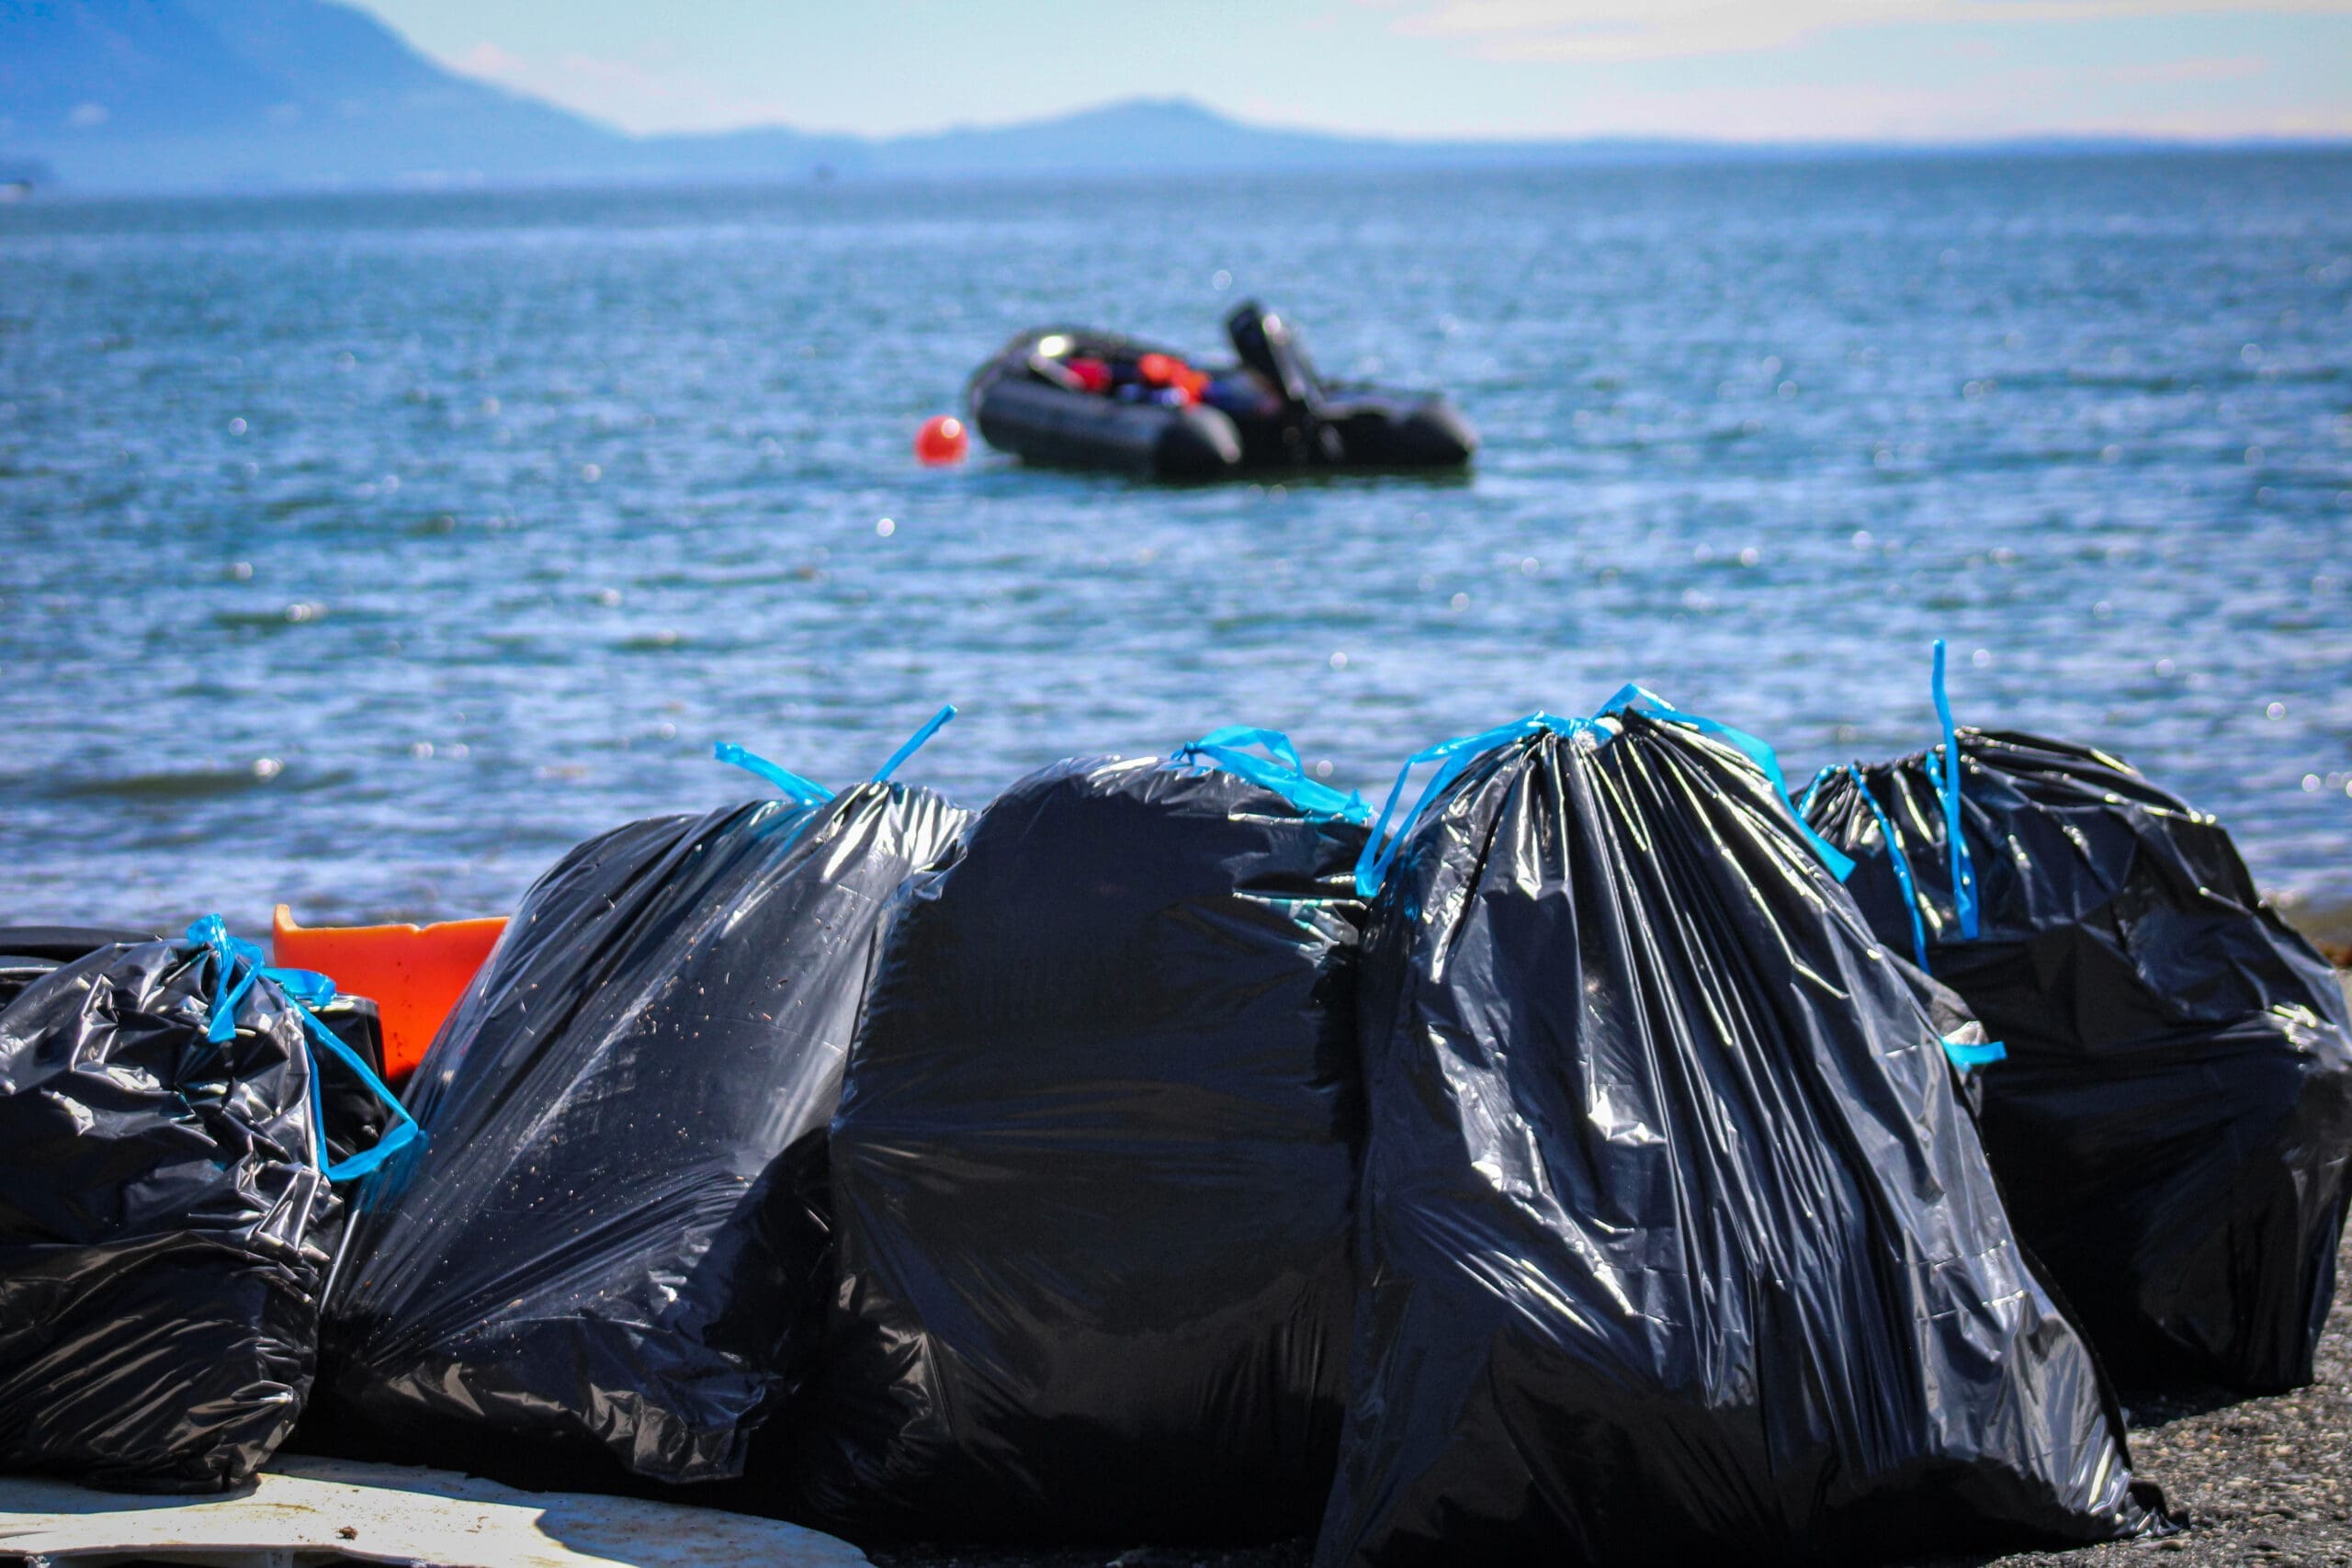 Trash bags full of marine debris with a Zodiac in the background